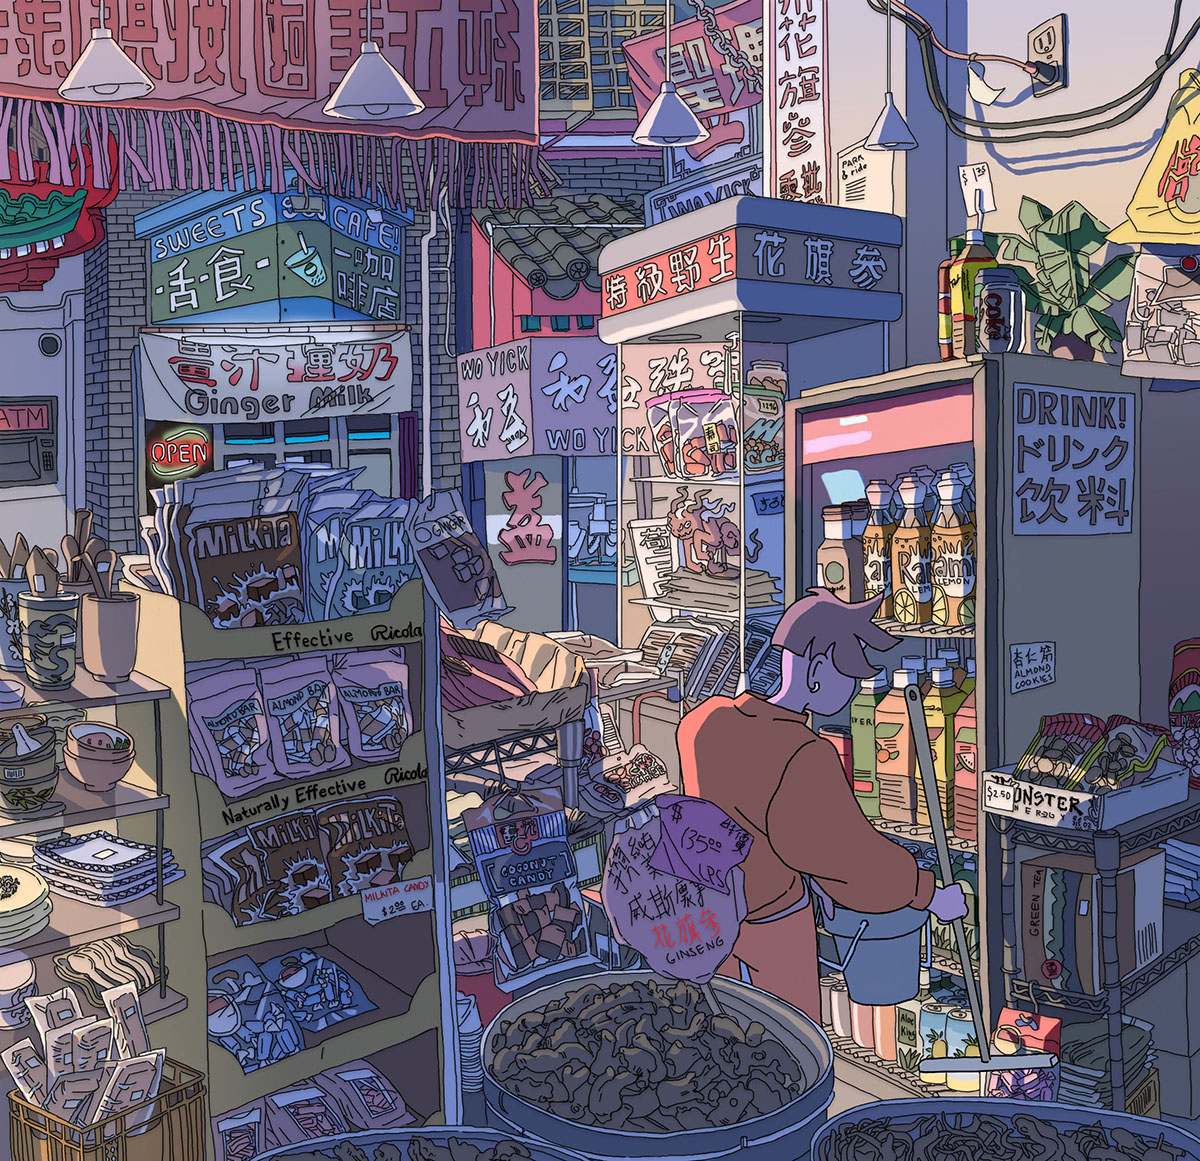 Digital painting of a busy asian market filled with display cases of various foods, man with bucket in front of drink display, dramatically lit with shadows cast